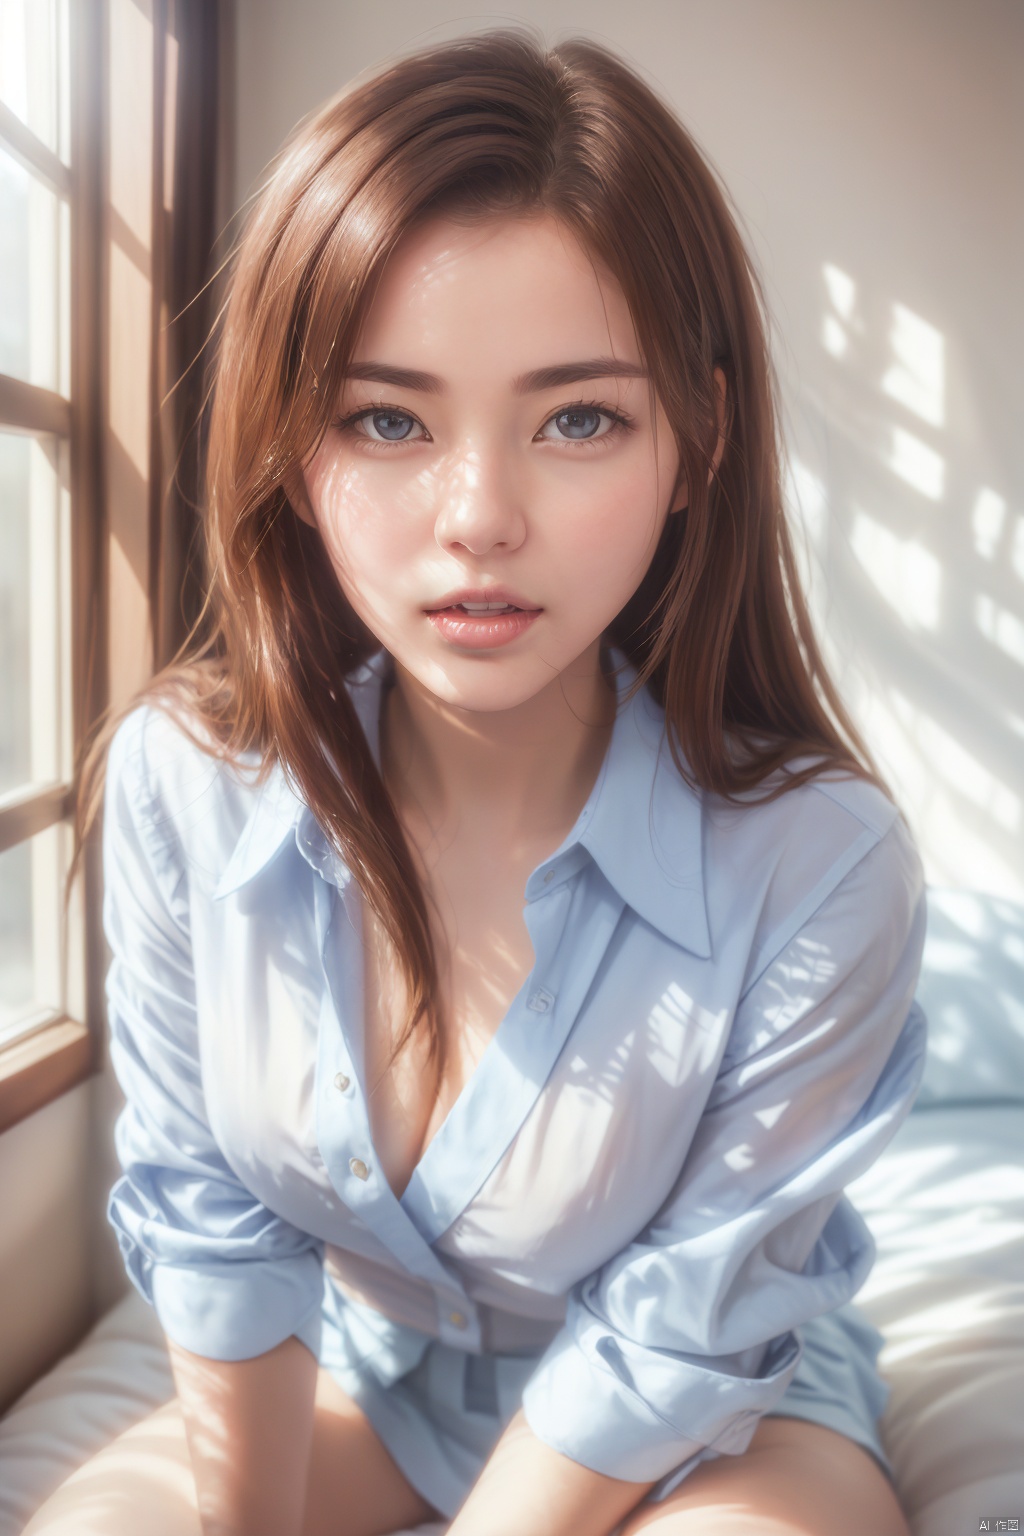  1 girl sitting on the bedroom bed, wearing sexy clothes, school uniform, uniform, white clothes, outdoor light shining into the room, sexy face, charming expression, hands supporting, sitting, super realistic, best quality, ultra-high definition, biting lips, half body, up close, close-up, linzhiling, office lady
